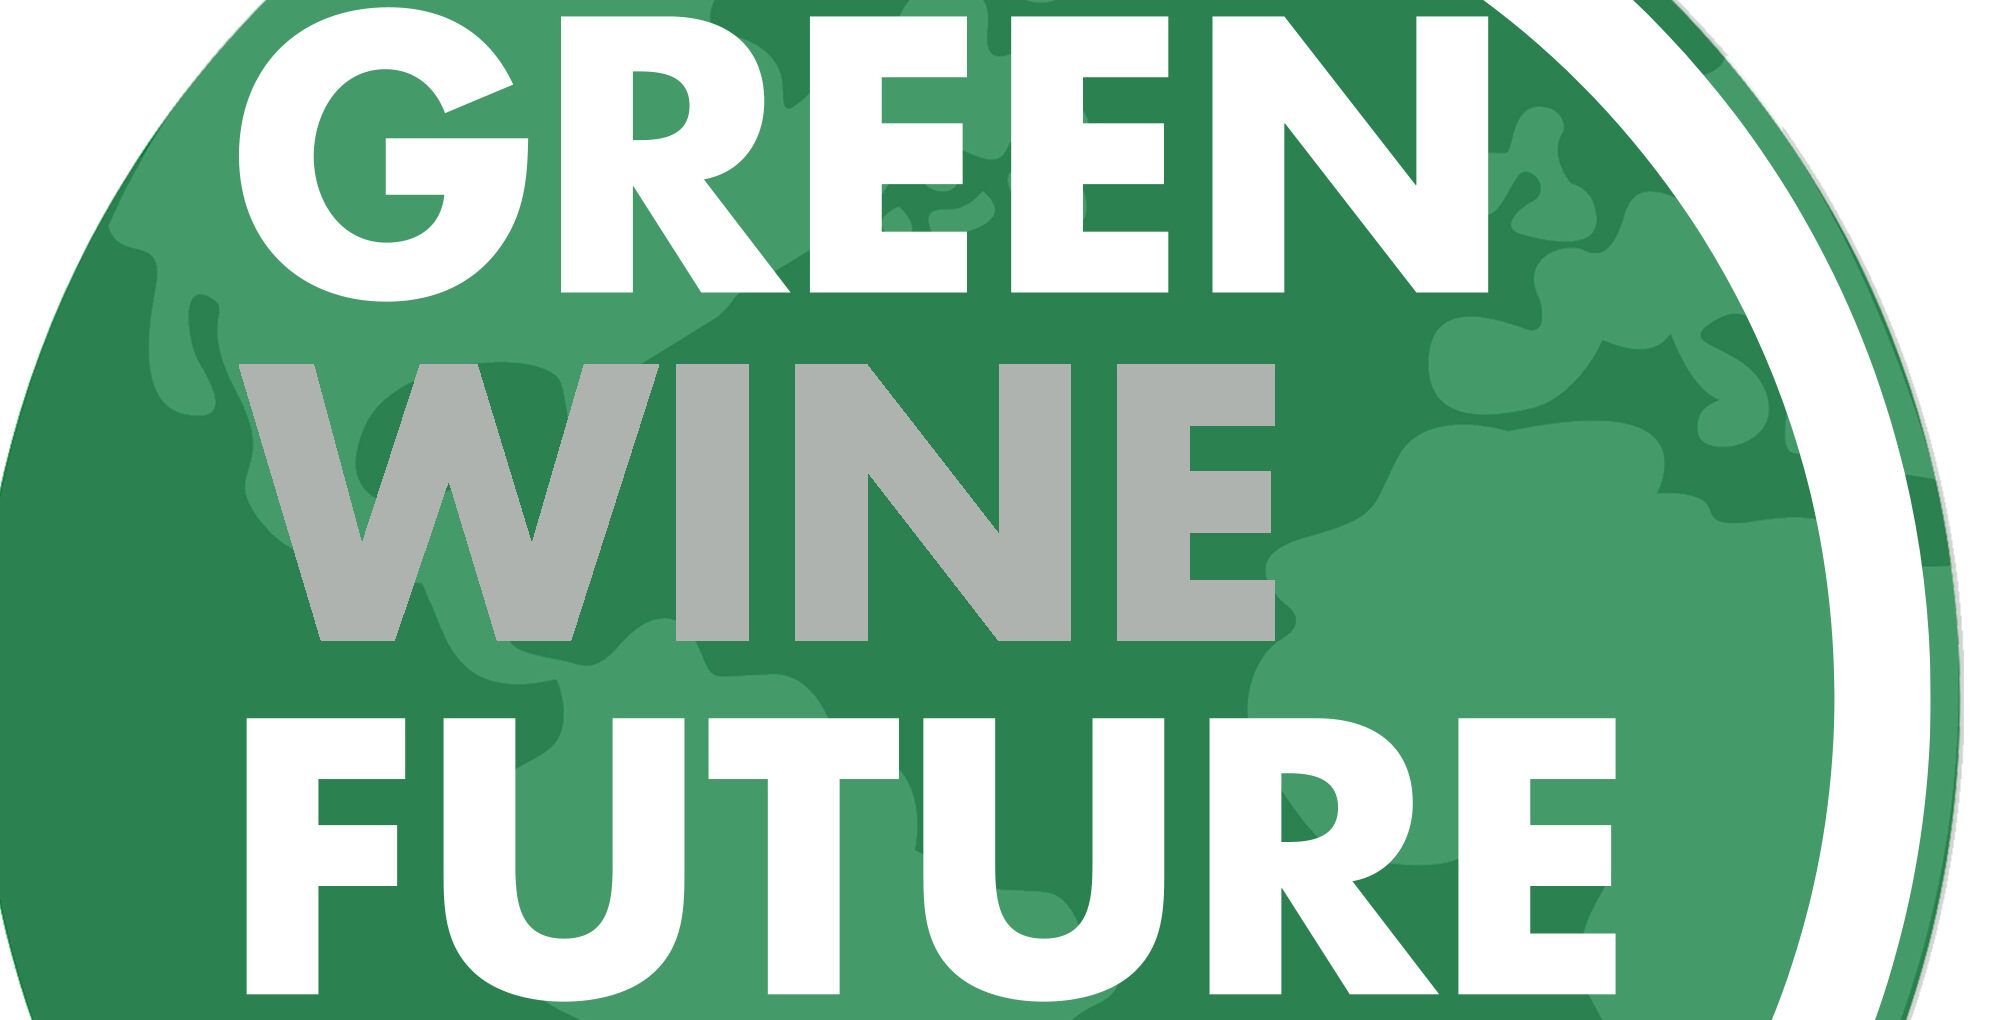 Green Wine Future hopes to drive global action on climate change